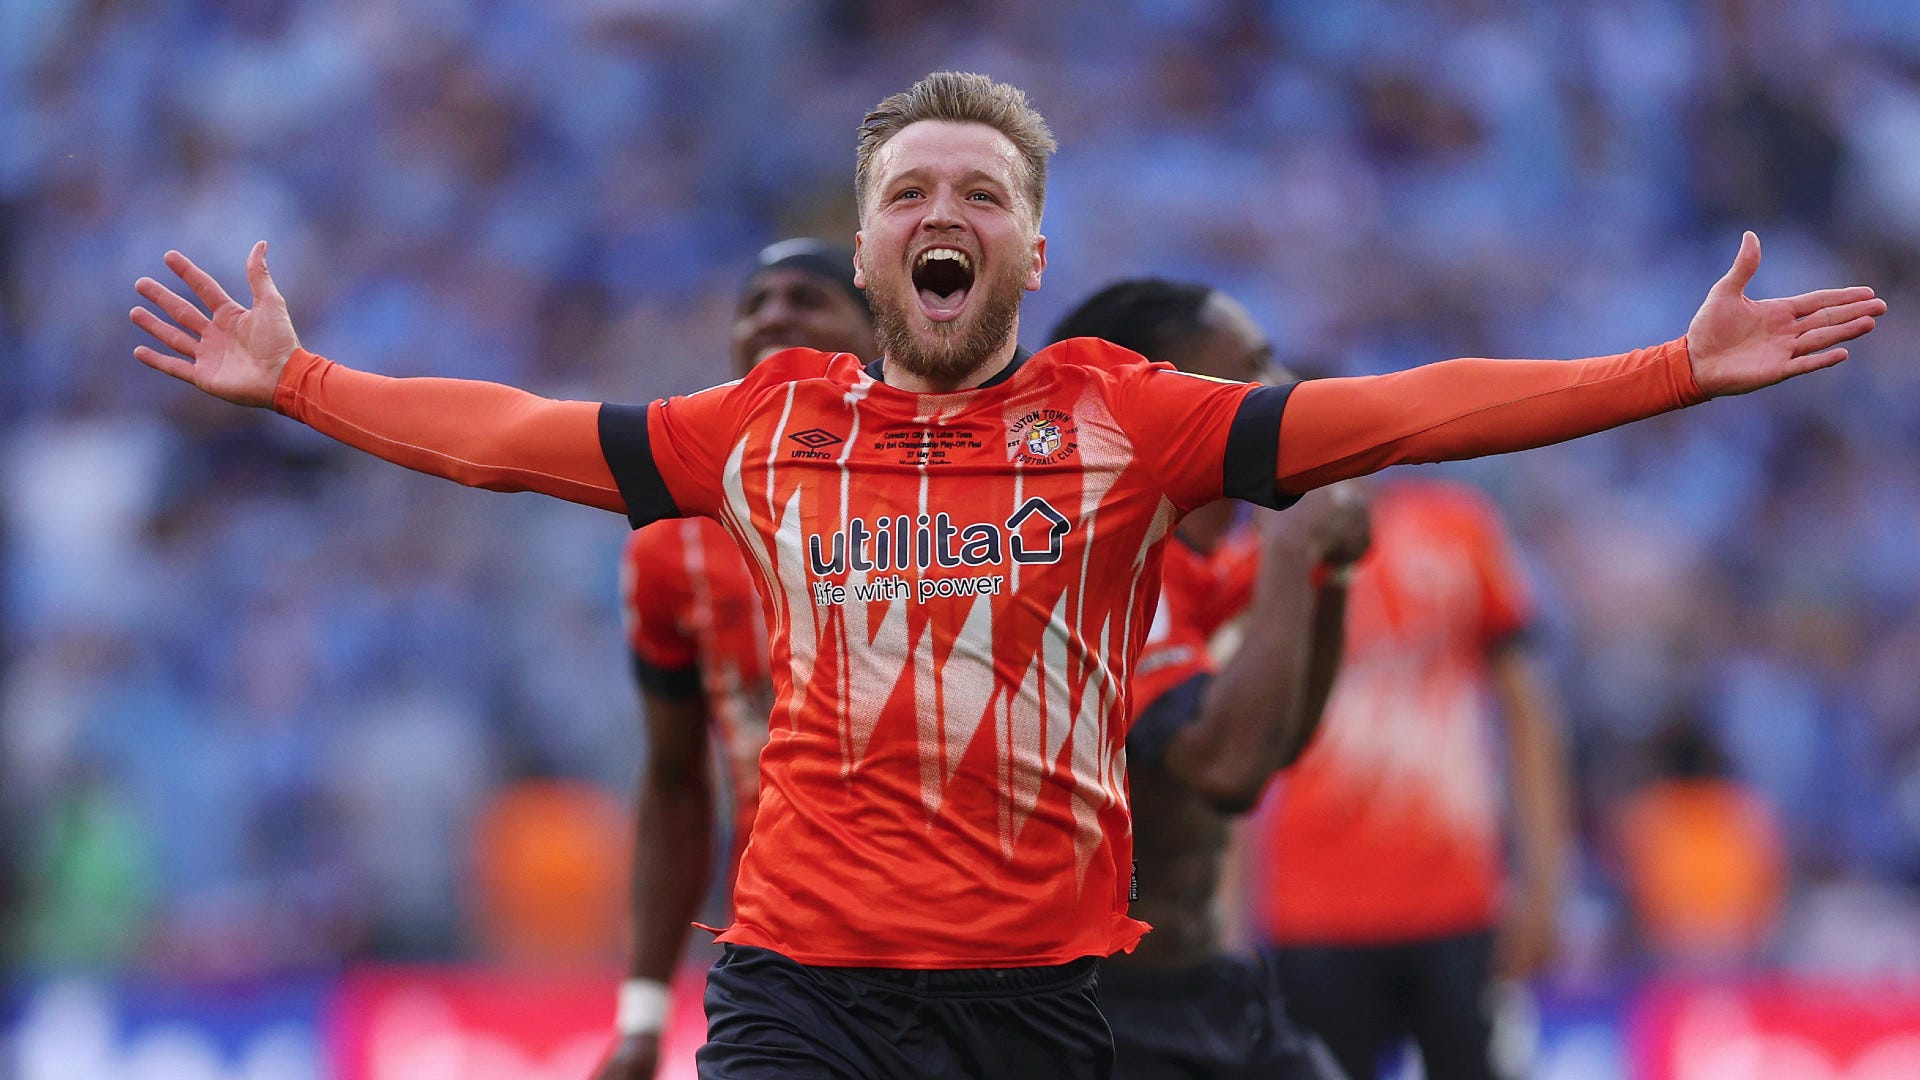  Luton Town and Bournemouth's journey to the Premier League was a remarkable one, as both clubs overcame financial difficulties and defied the odds to reach the top tier of English football.